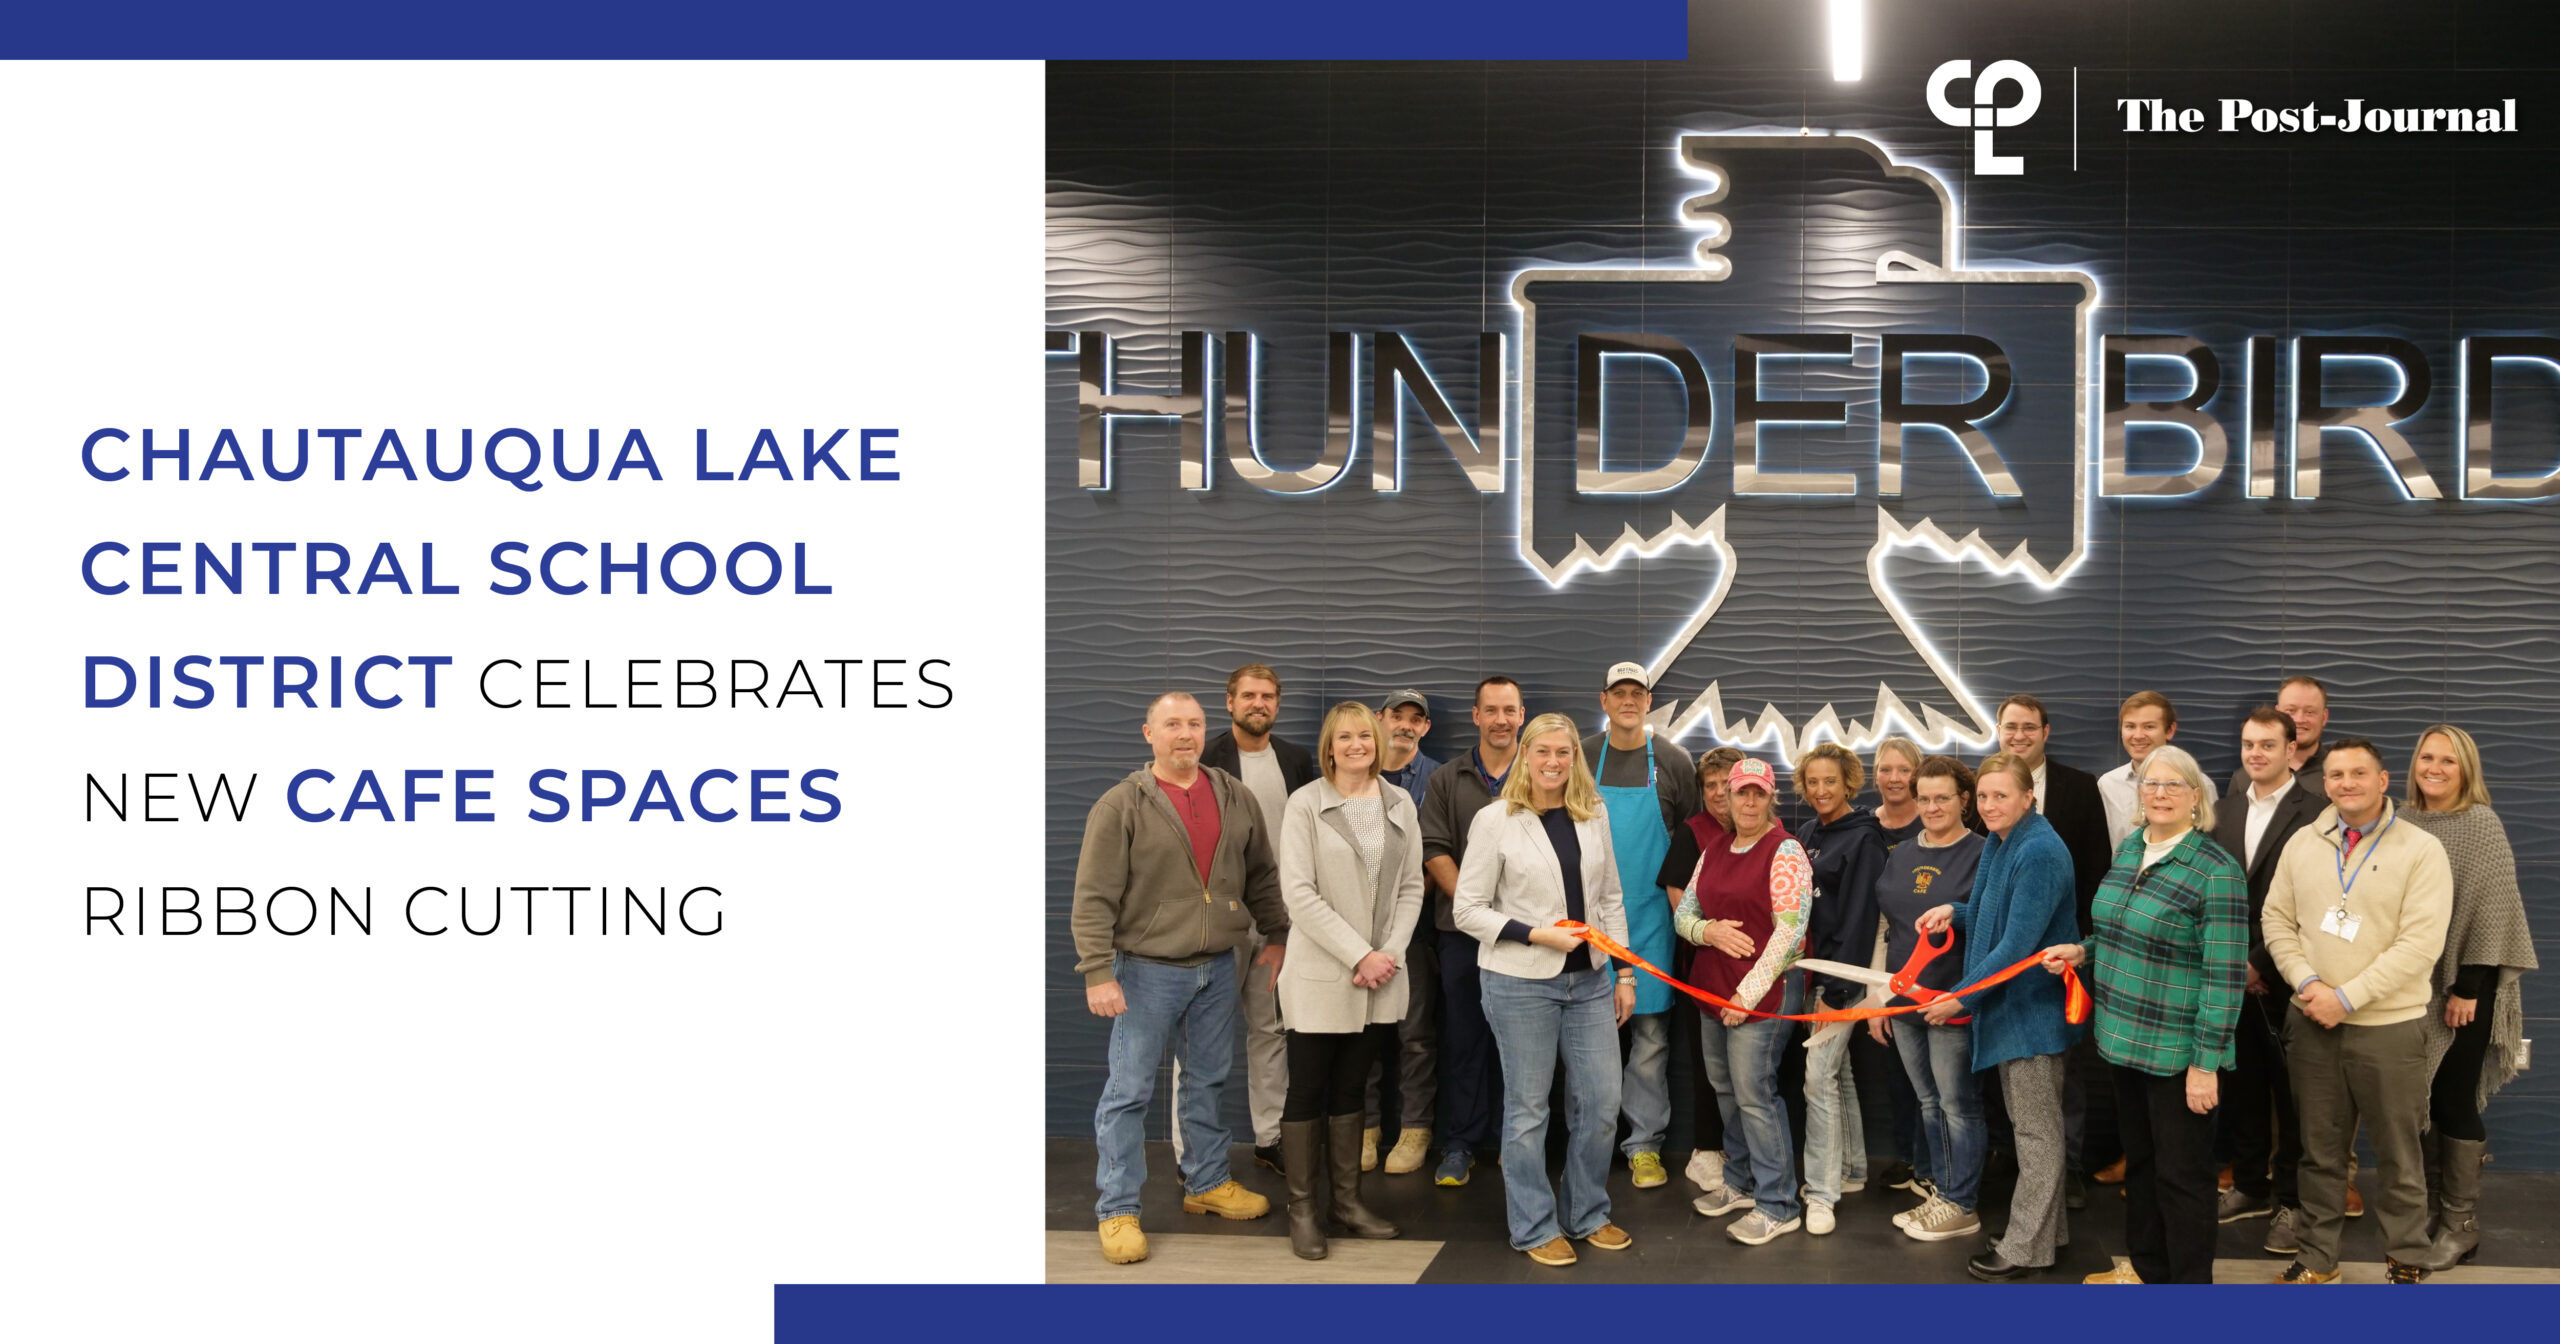 Graphic shows an image of people standing before a sign that reads Eagles and has an eagle logo. The people are cutting a large red ribbon. The left side of the graphic reads "Chautauqua Lake Central School District Celebrates New Cafe Spaces Ribbon Cutting."